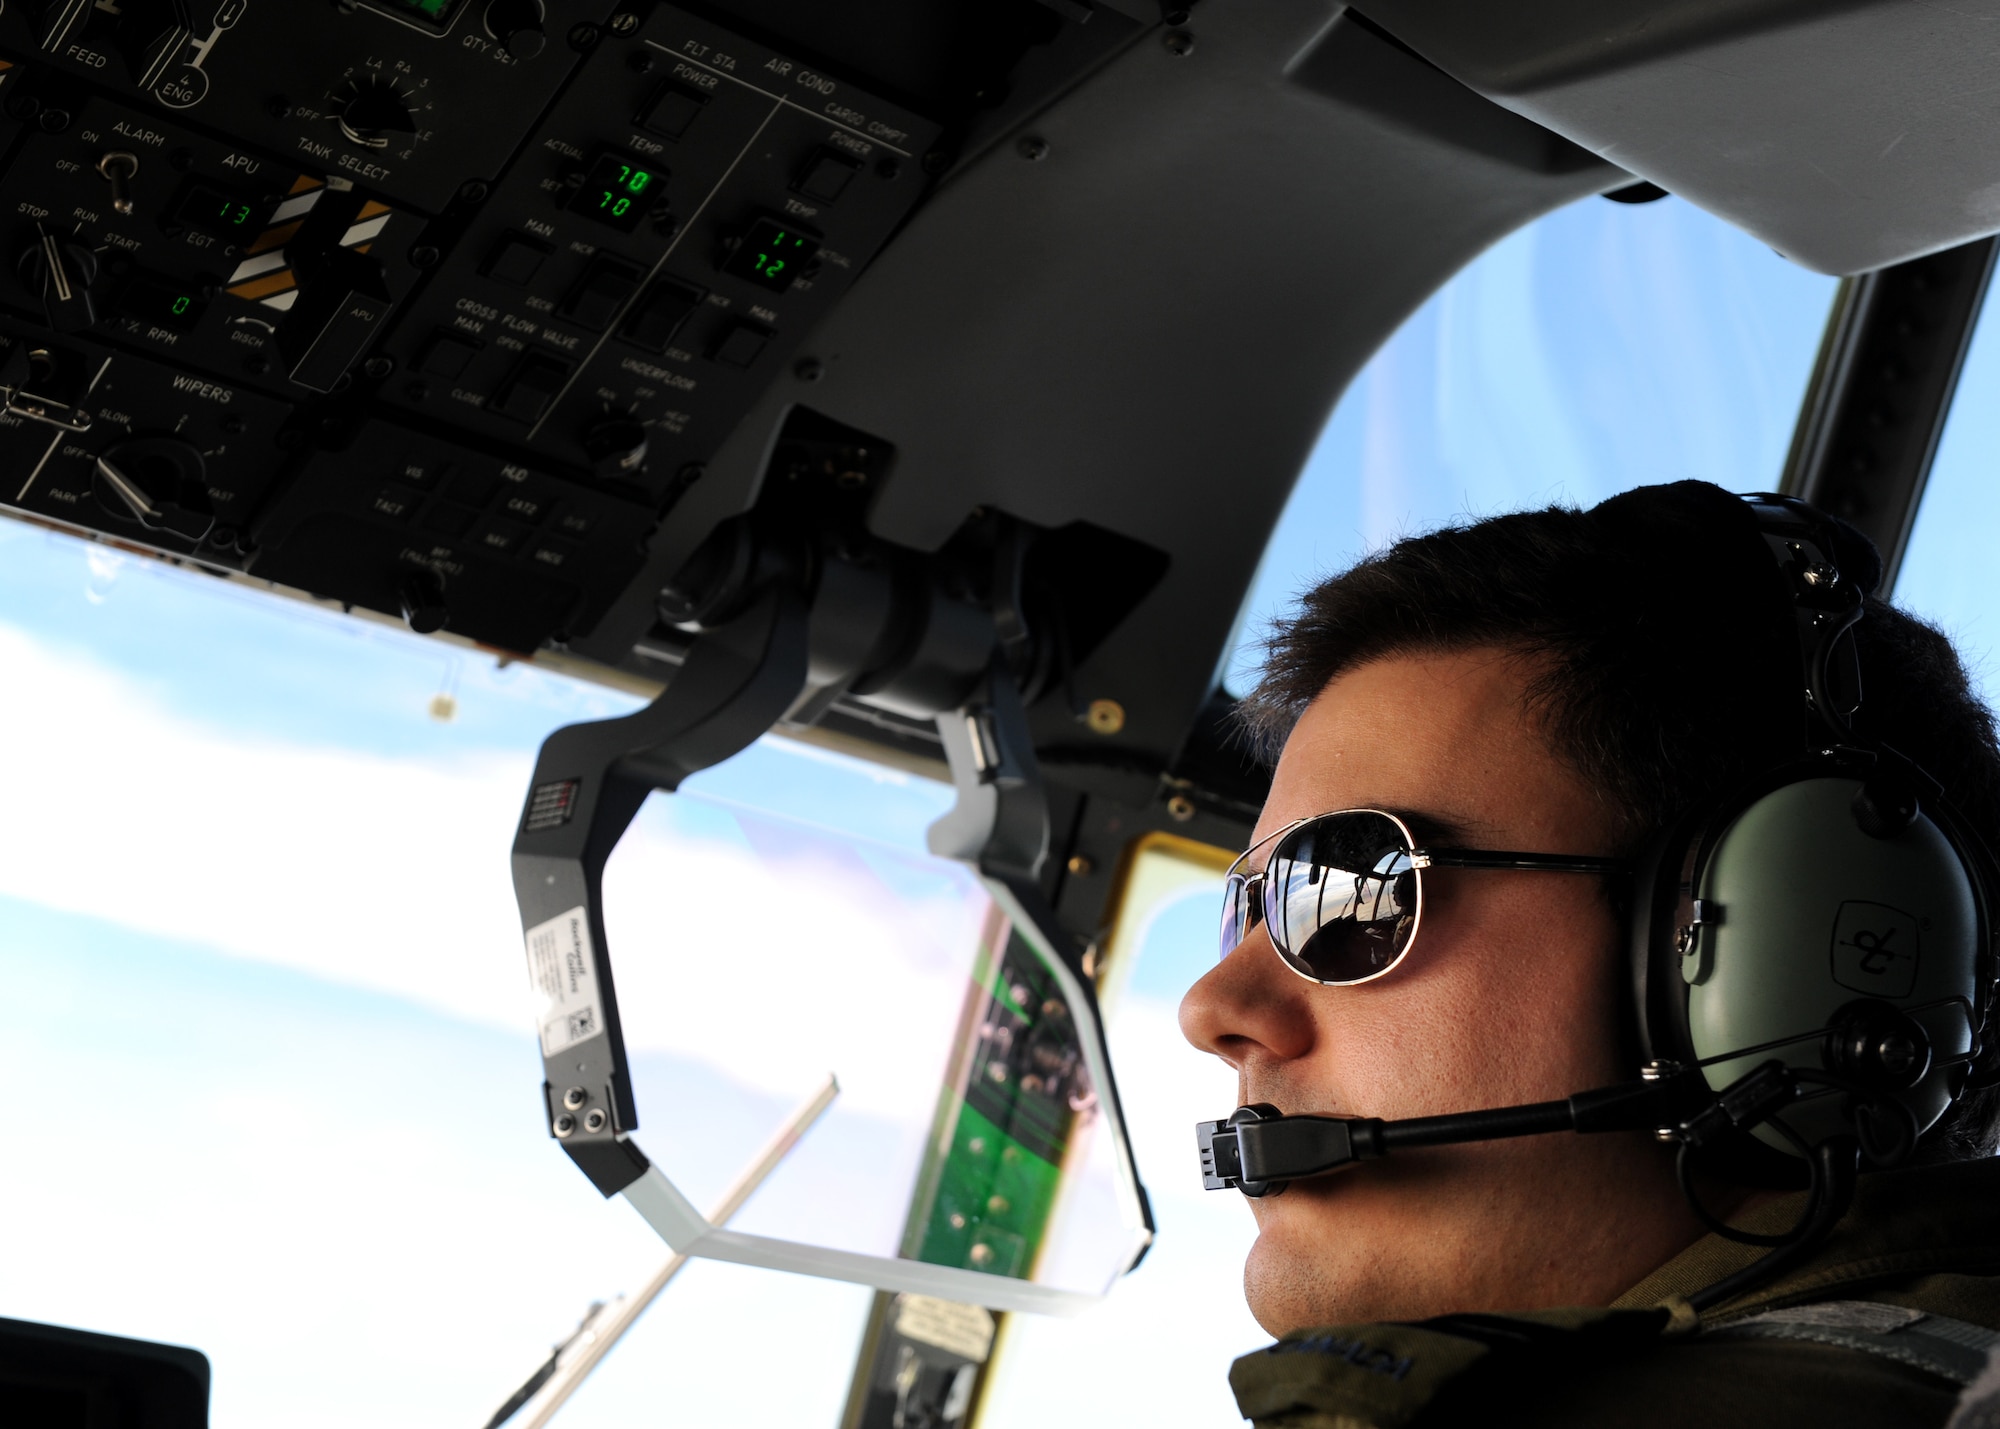 A square photo with a male wearing a headset looking out an aircraft windshield.